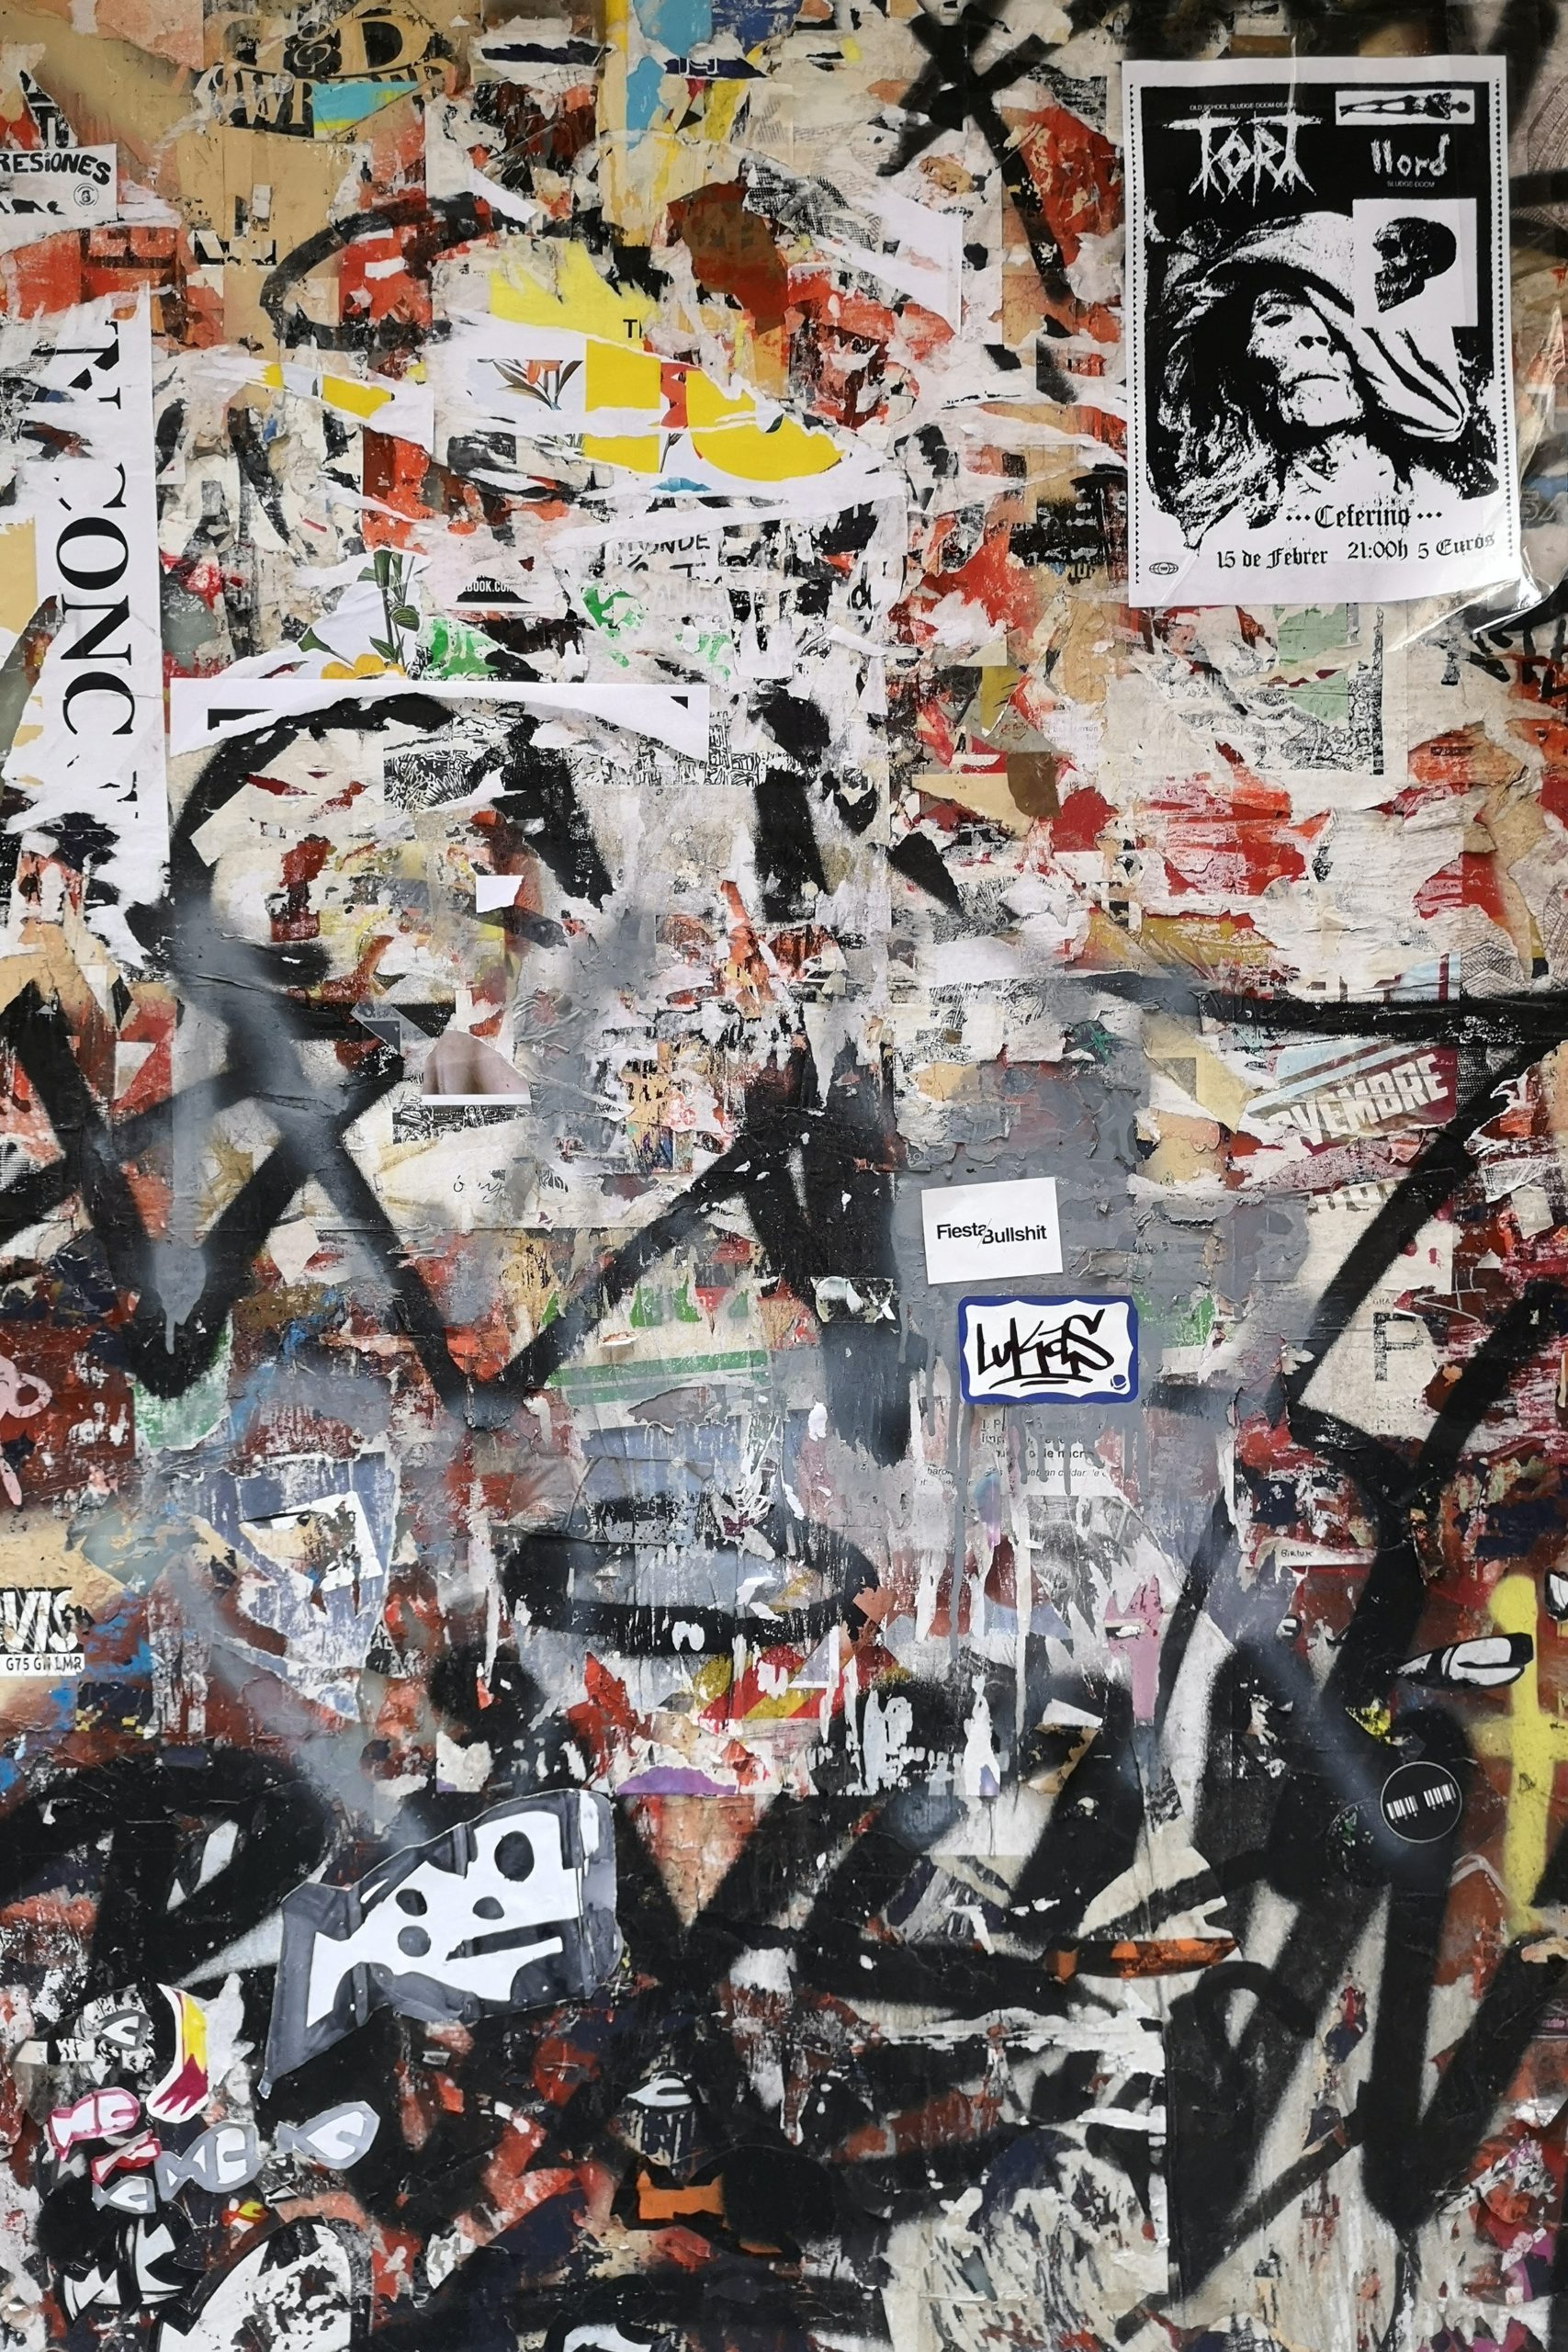 Abstract Wallpaper including black graffiti and torn paper.